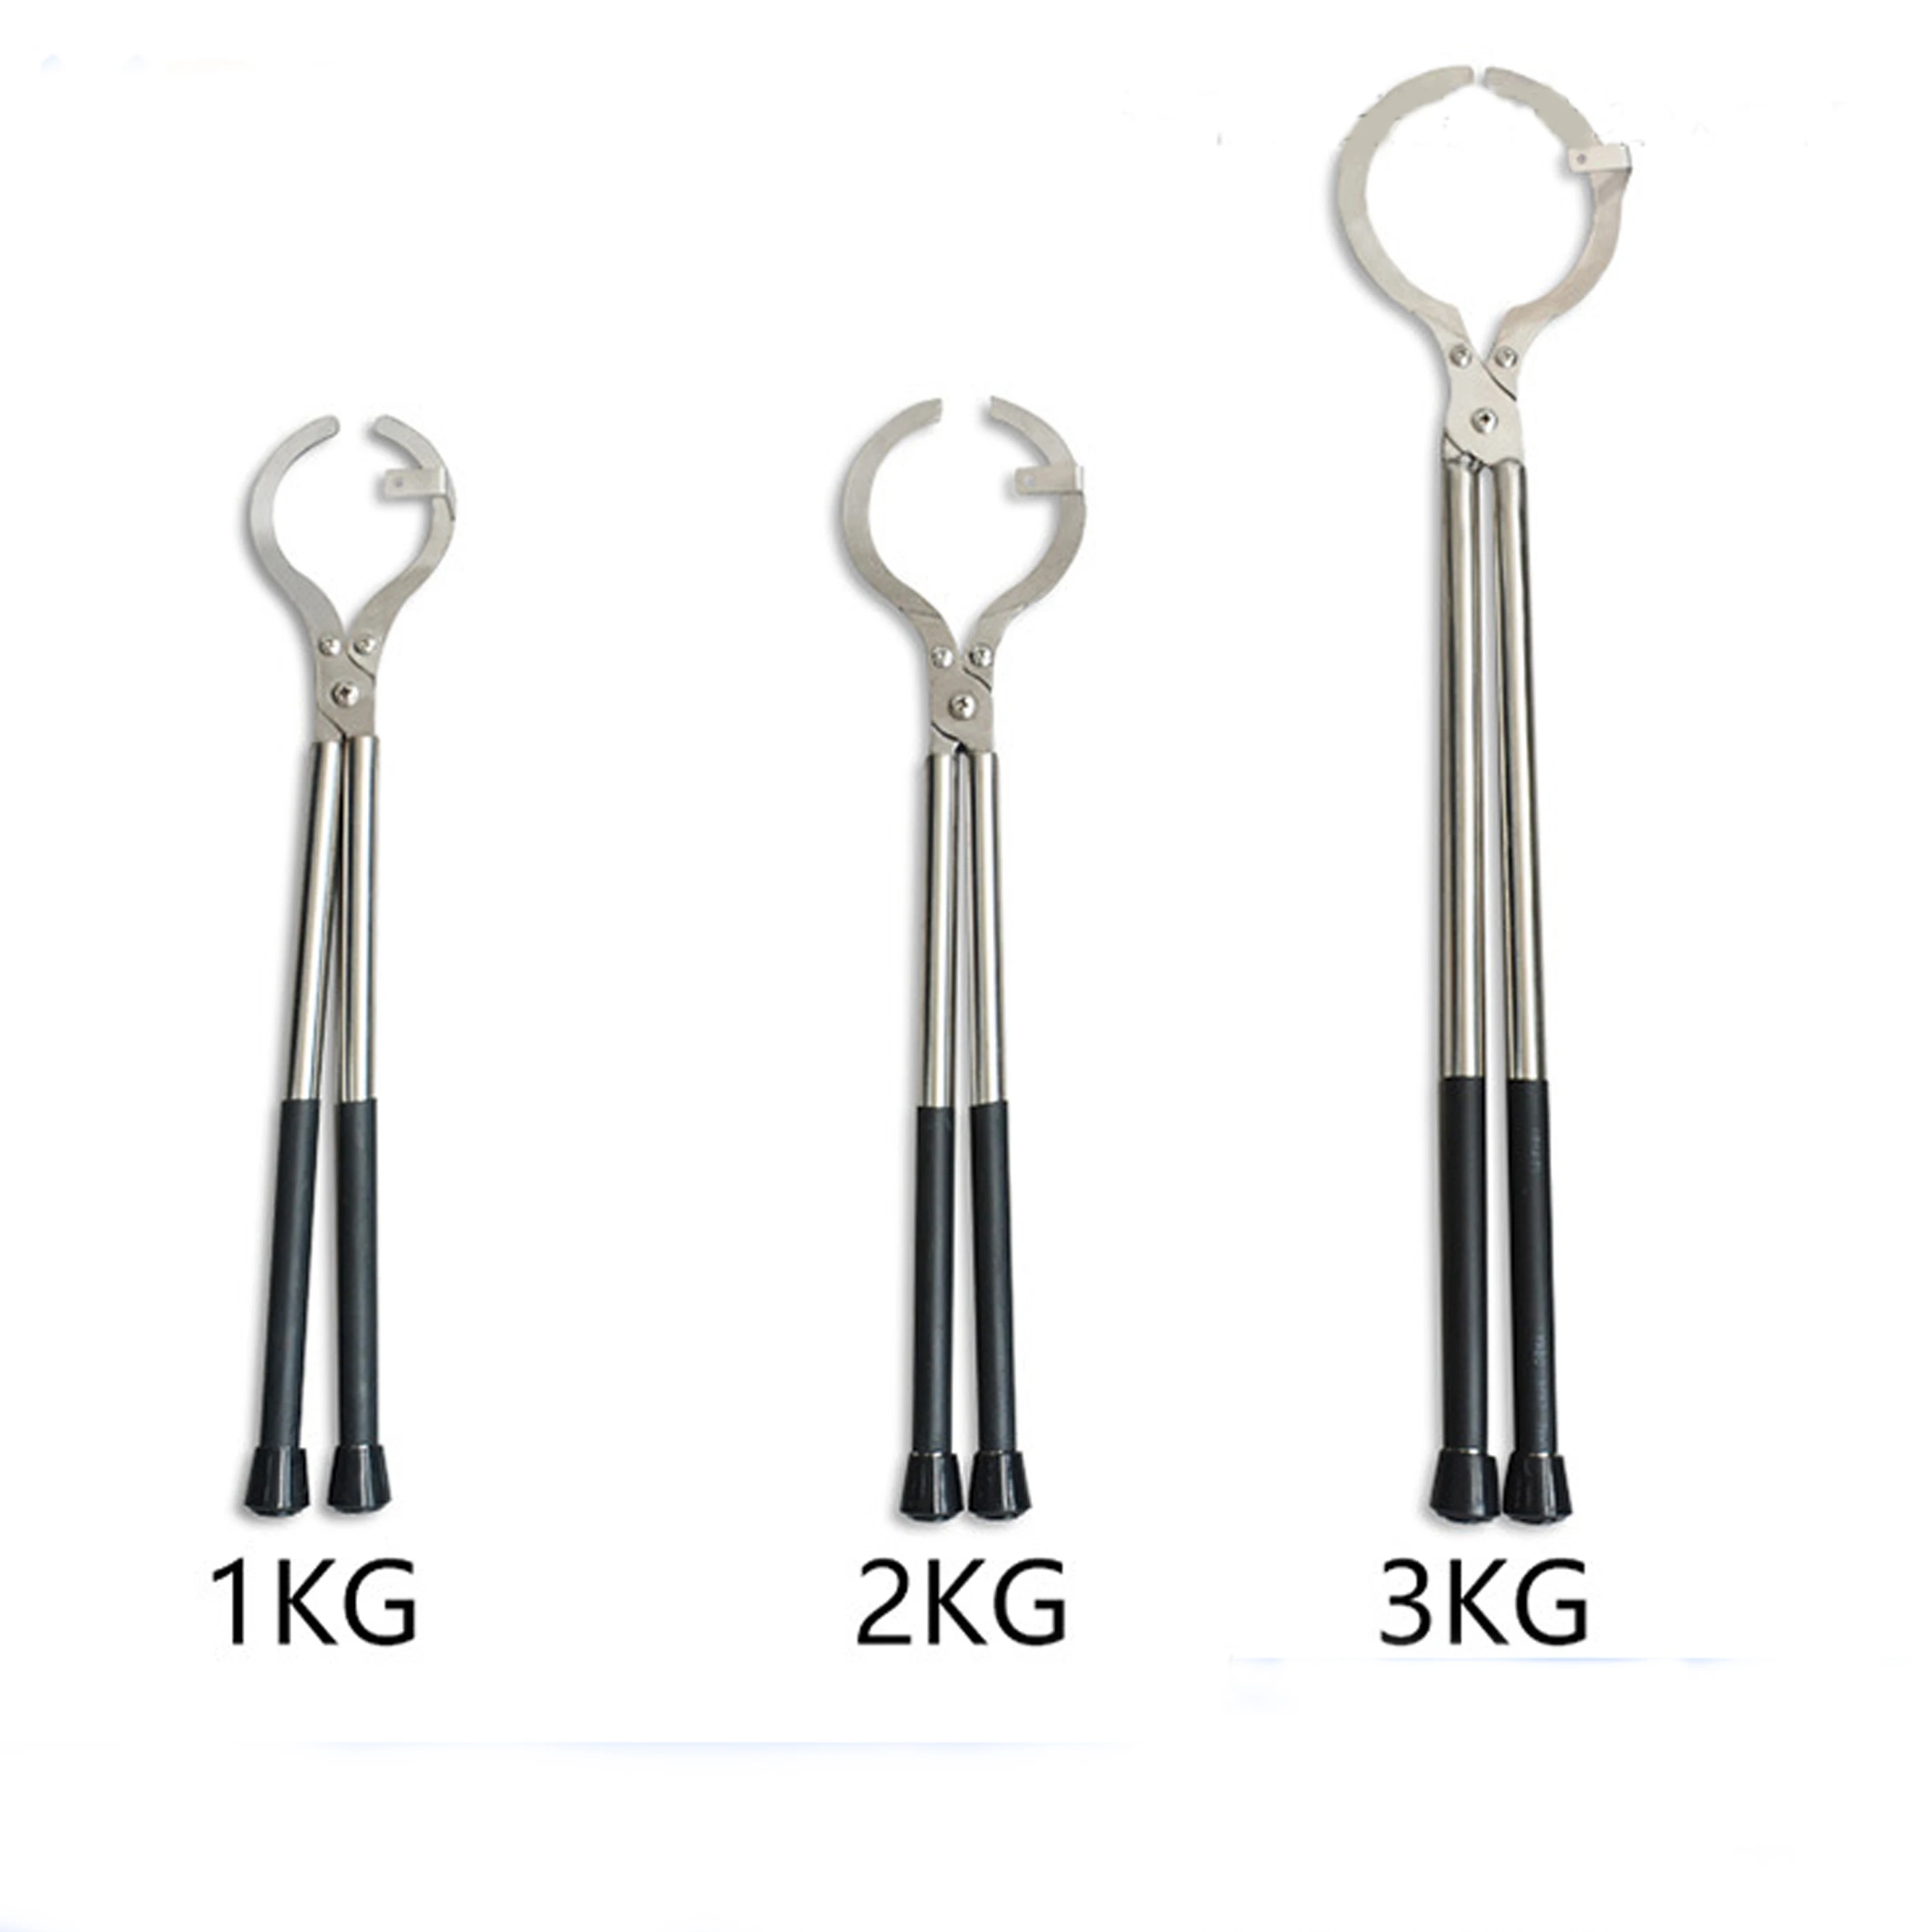 Stainless Steel Crucible Tongs 2kg Graphite Melting  Holder  Gold Melting Furnace Attachment   Jewelry Tools mini kaya crucible tongs for graphite furnace melting casting machine flask melting dish holder stainless clam jewelry pliers